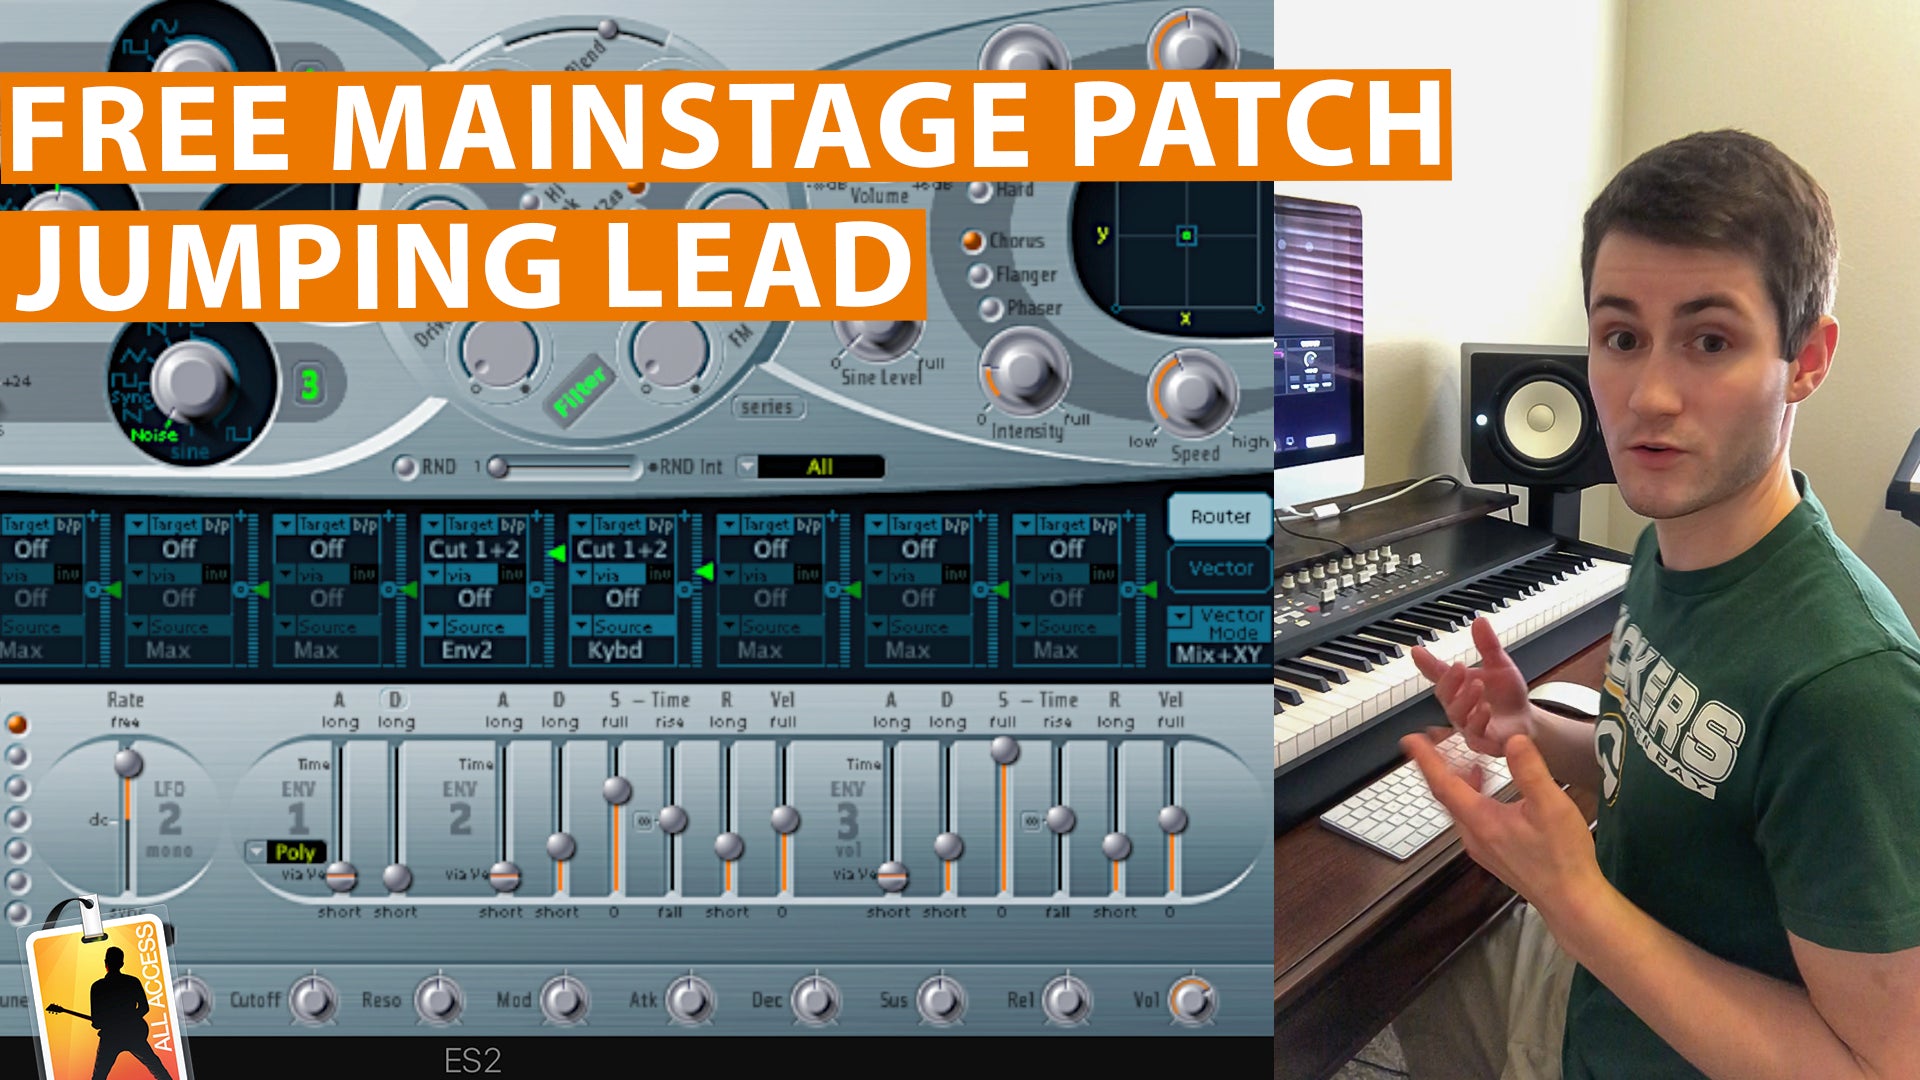 Free MainStage Worship Patch! - Jumping Lead